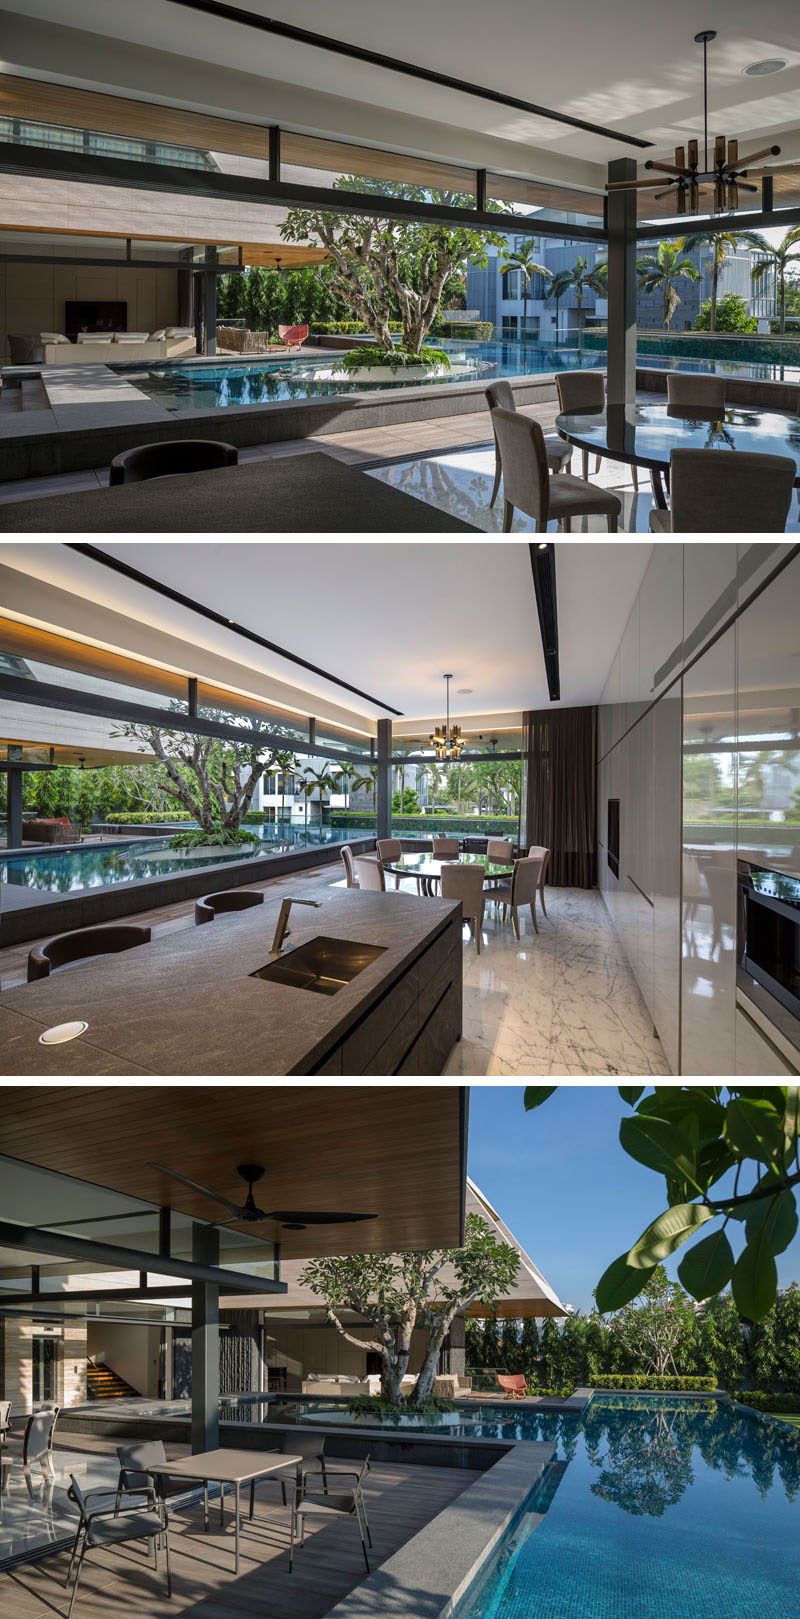 This modern house has retractable walls that open the social areas of the house, like the kitchen, dining and living room, to the wrap around patio and pool. #Kitchen #DiningRoom #SwimmingPool